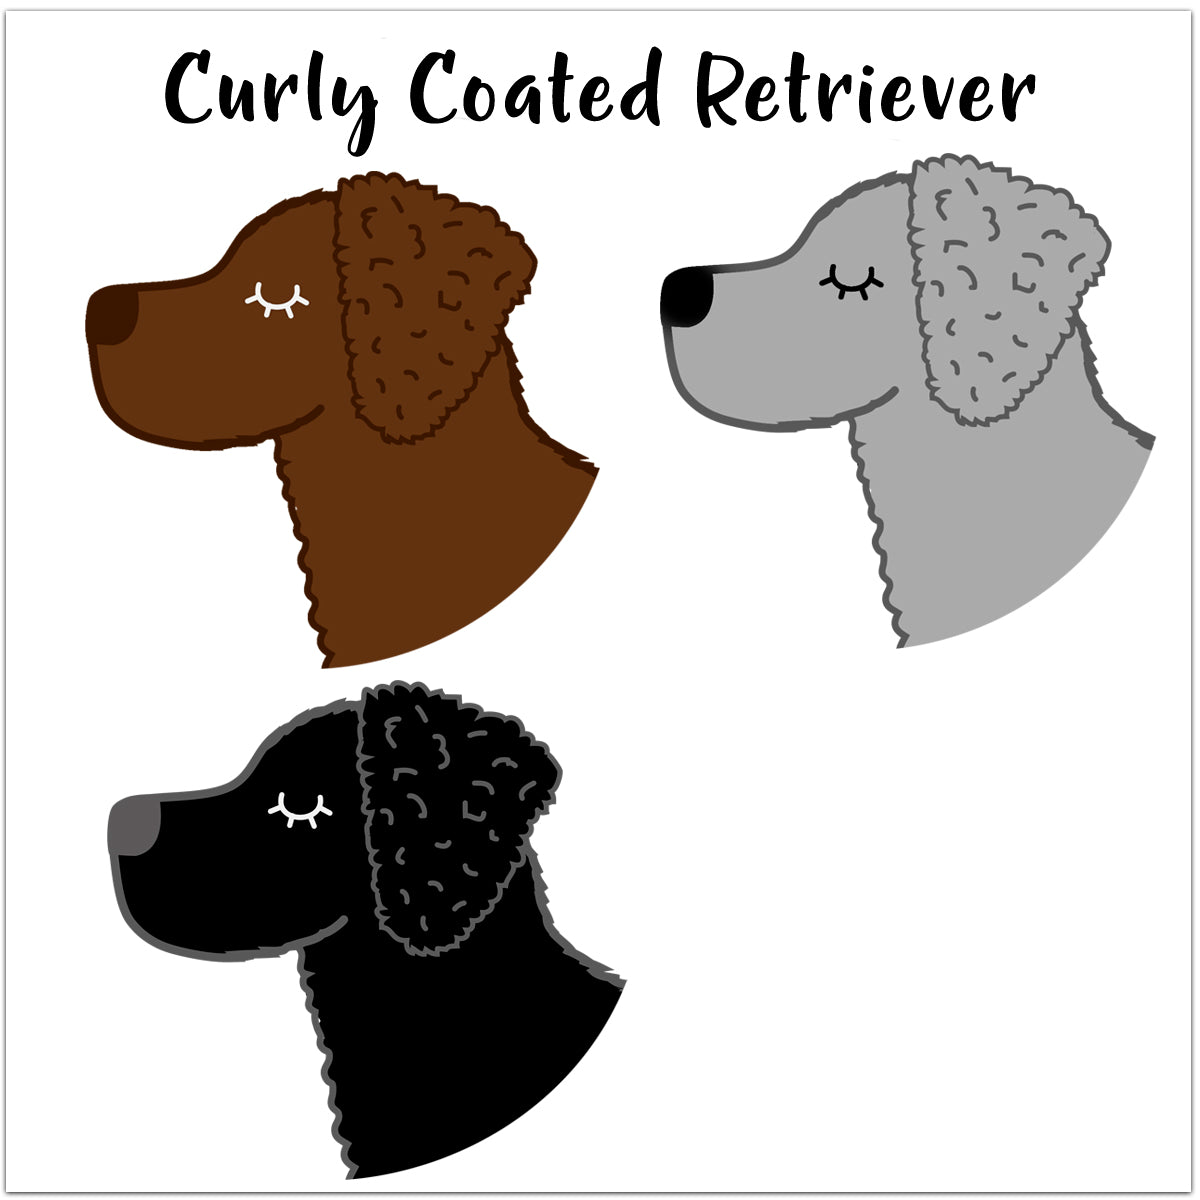 Curly Coated Retriever Personalised Treat Training Bag  - Hoobynoo - Personalised Pet Tags and Gifts